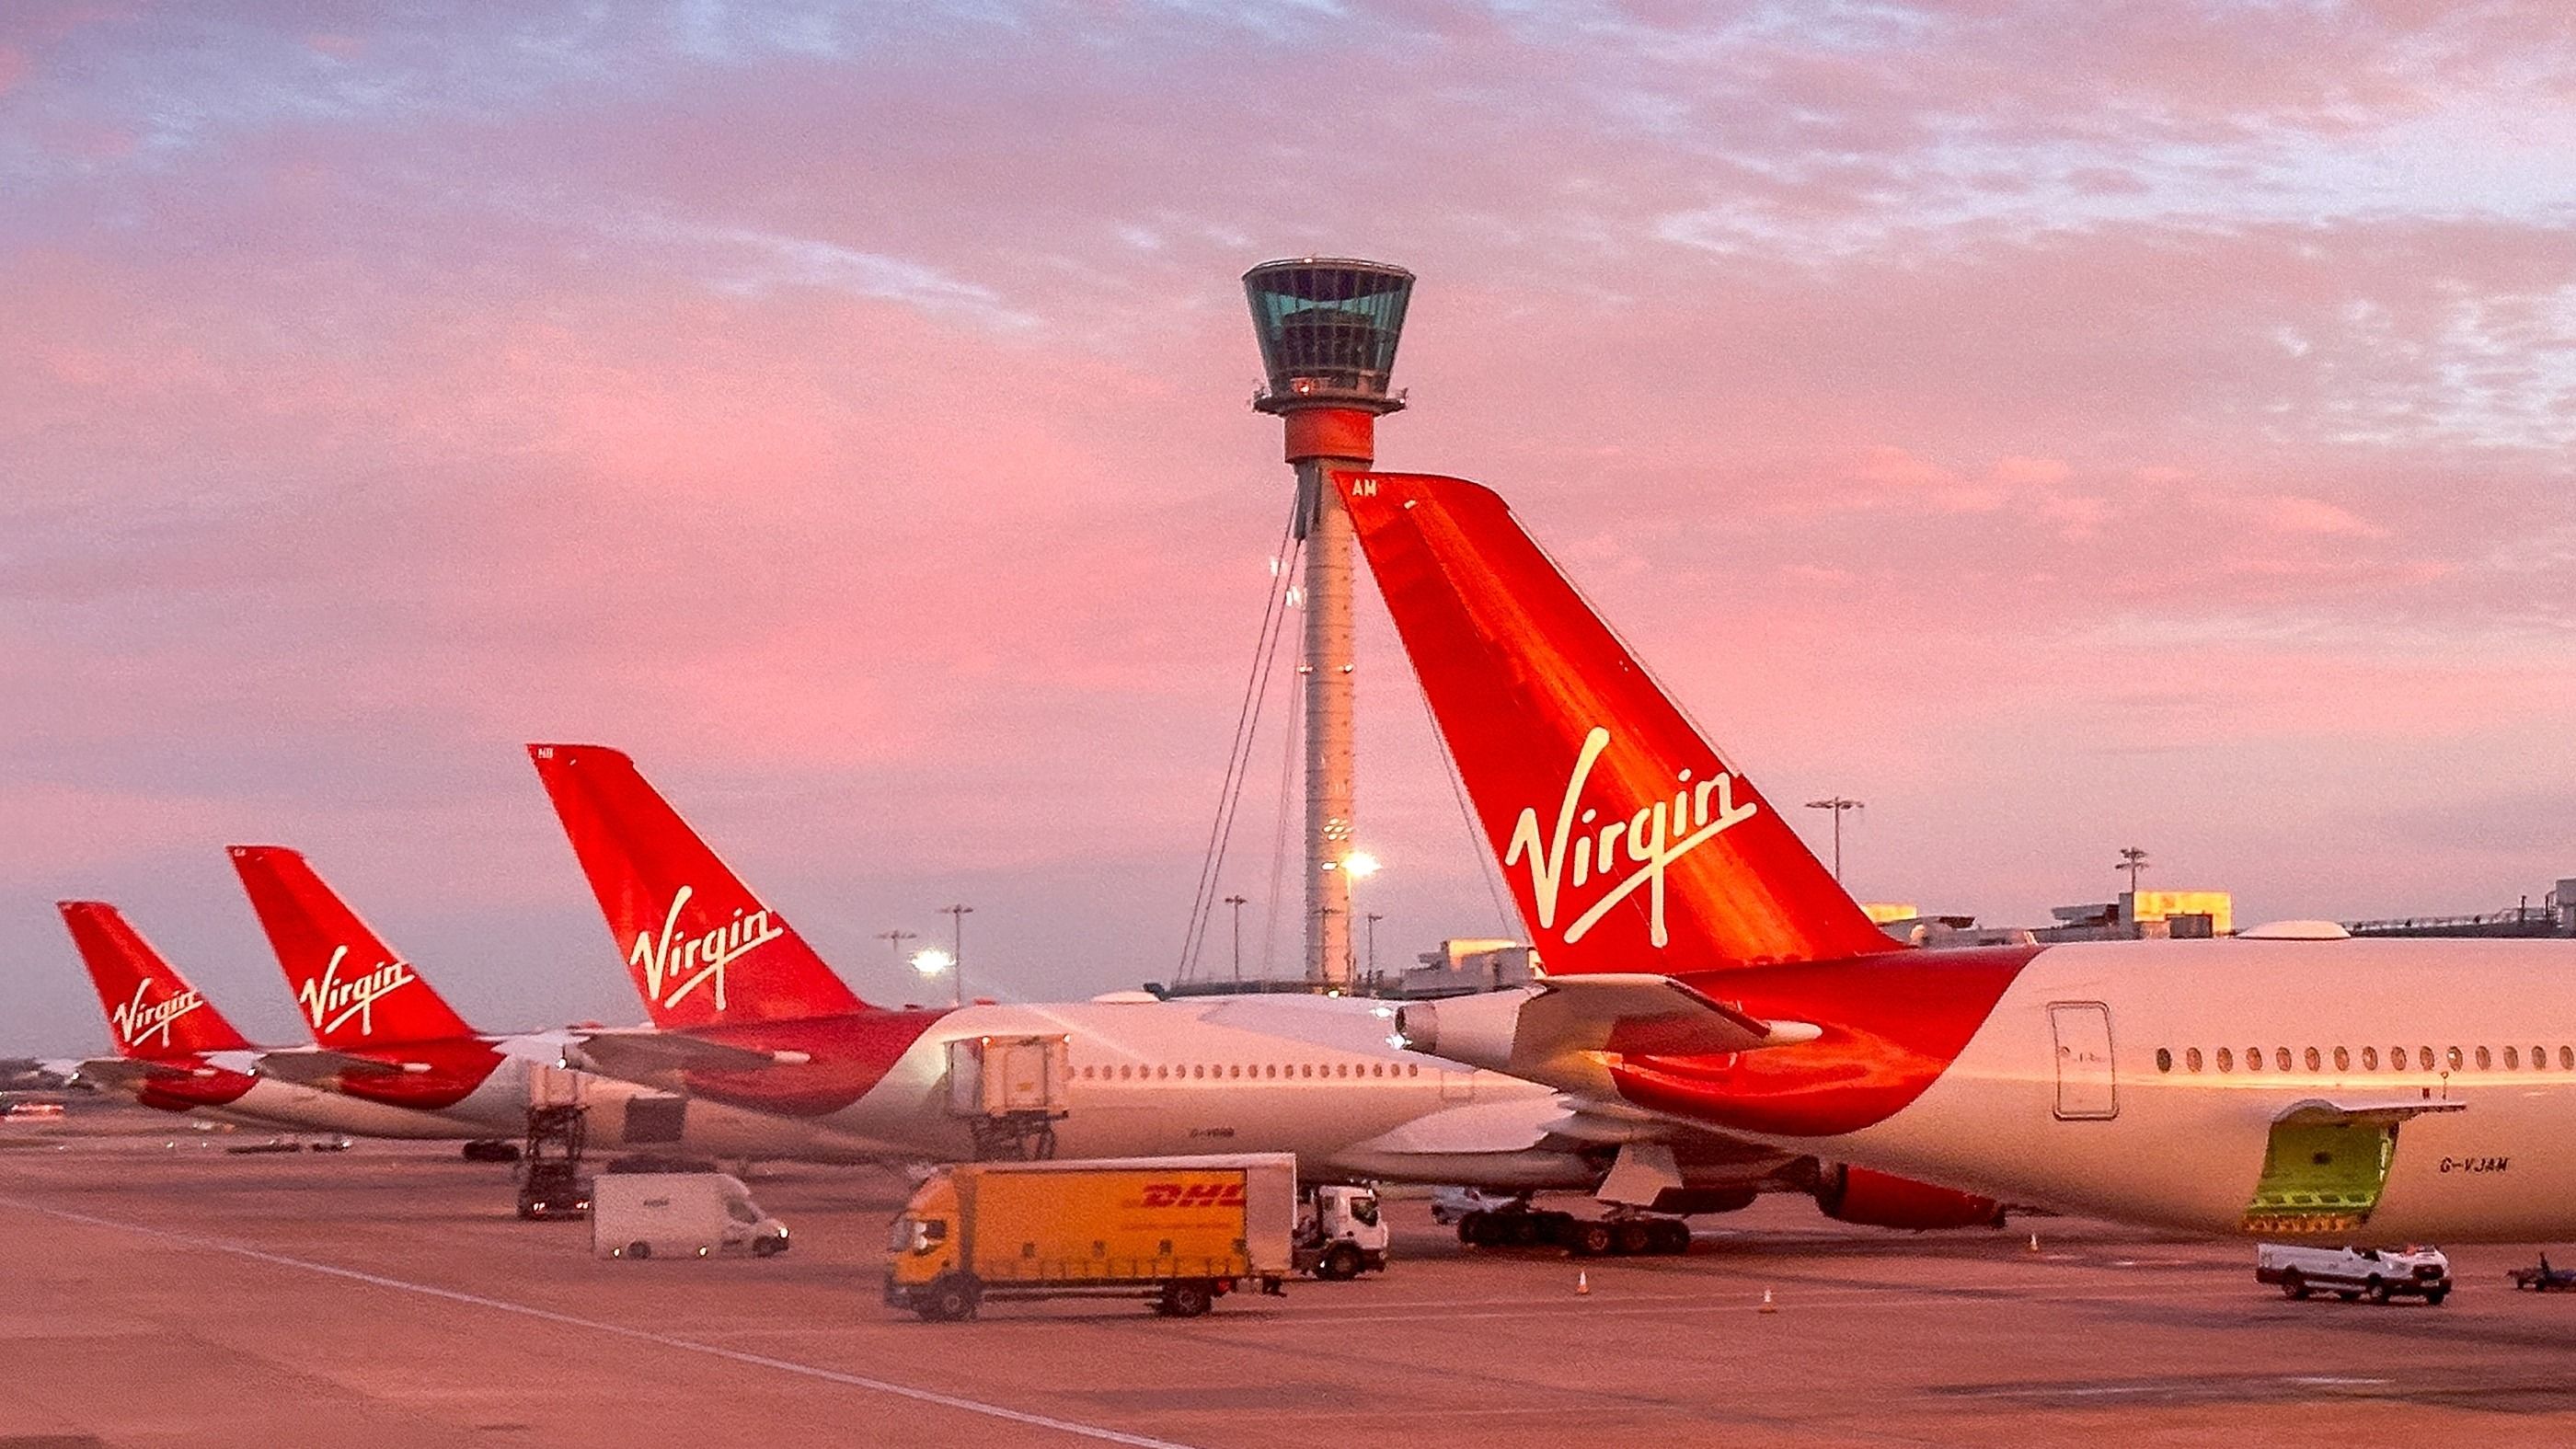 Virgin Atlantic Extends SkyTeam Status Match To 4 New Frequent Flyer Programs